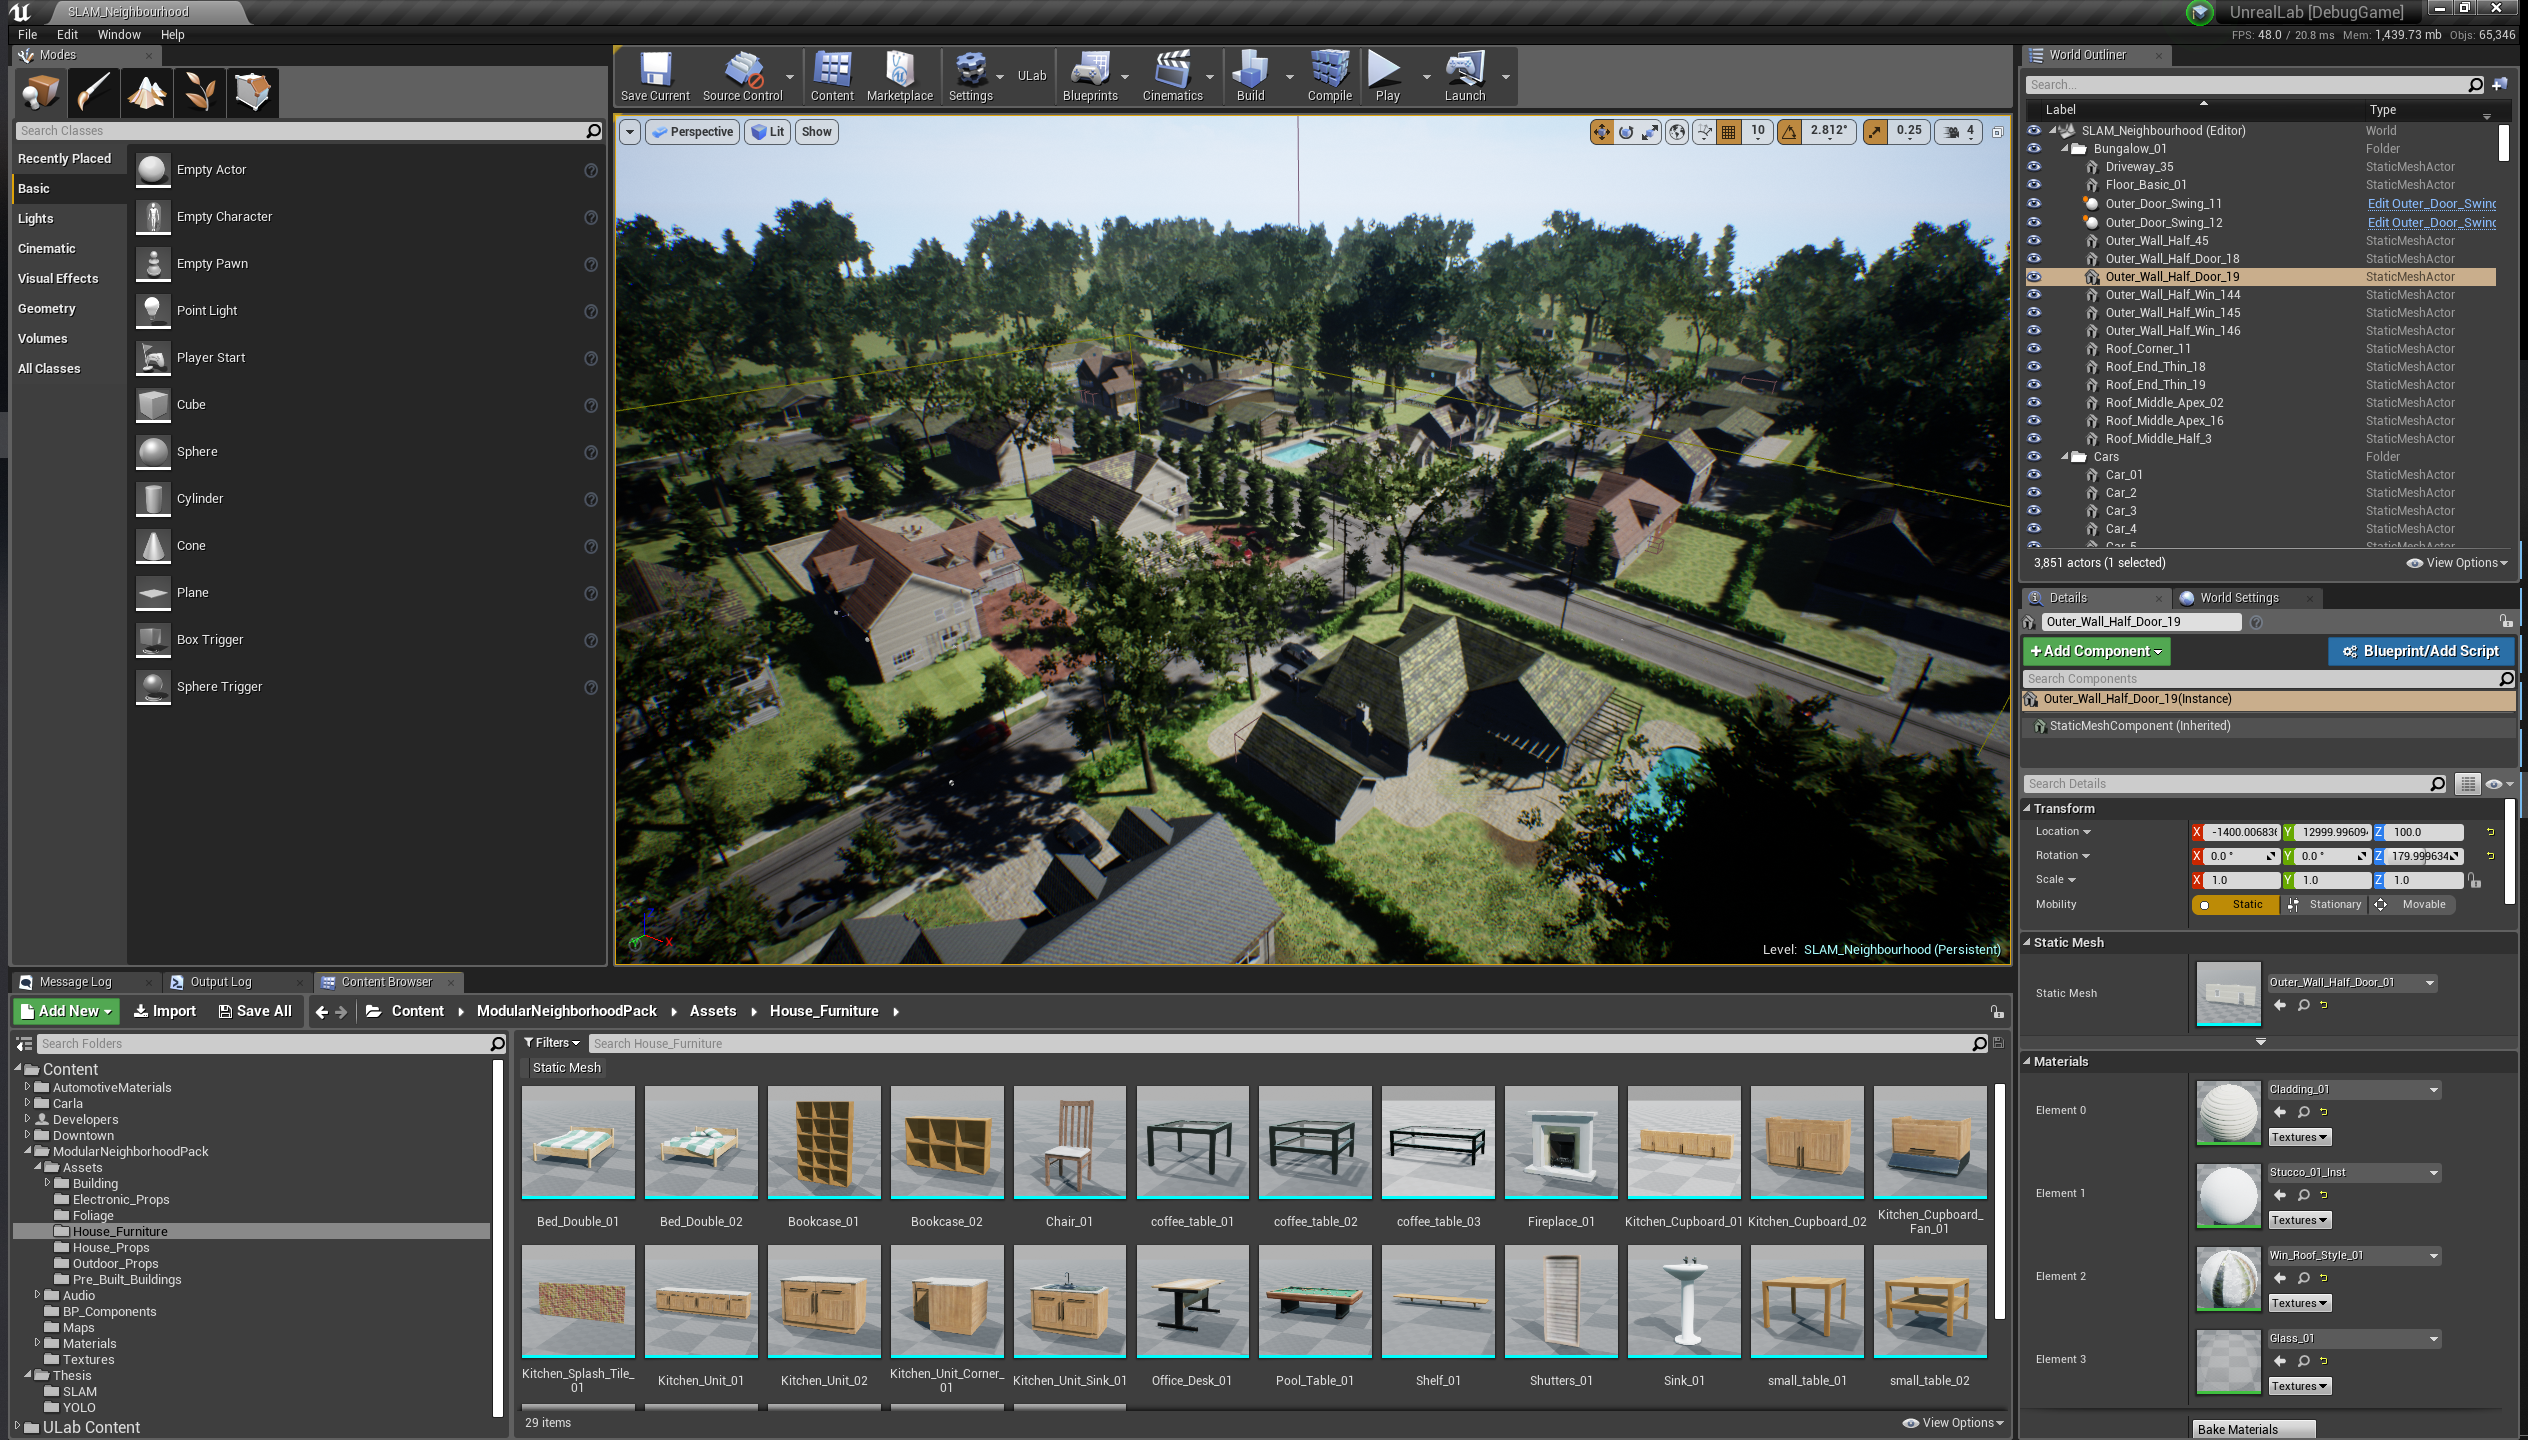 The Unreal Engine provides a simulation environment that allows one to simulate complex situations in a virtual world, such as data acquisition with UAVs or autonomous diving.